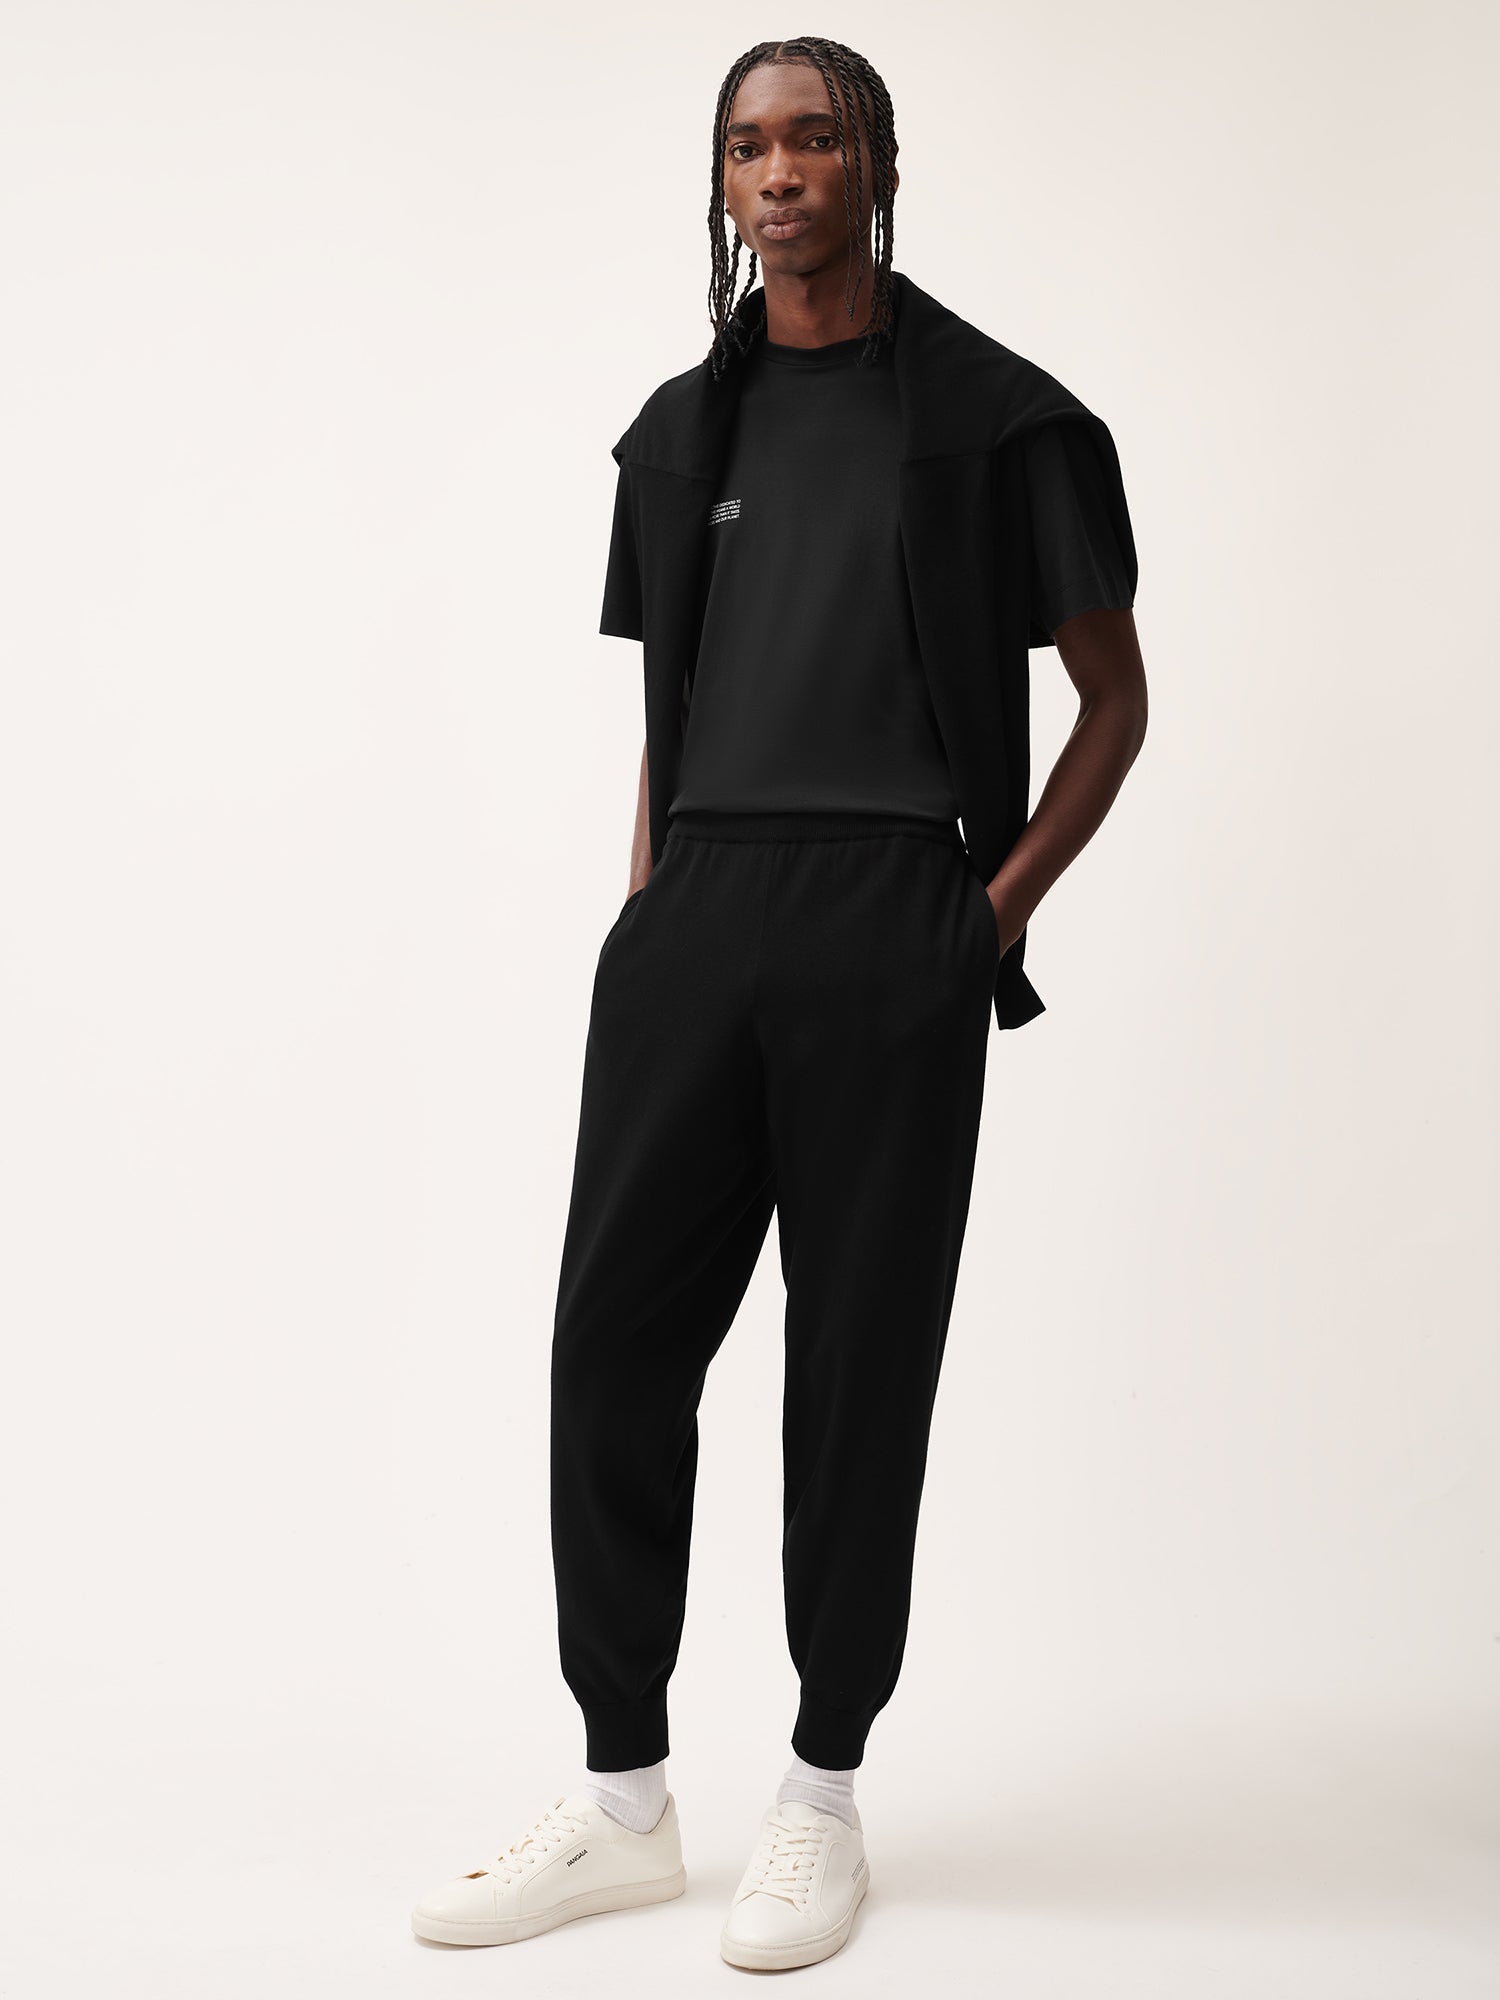 DNA_Knitted_Track_Pants_Black_male-1